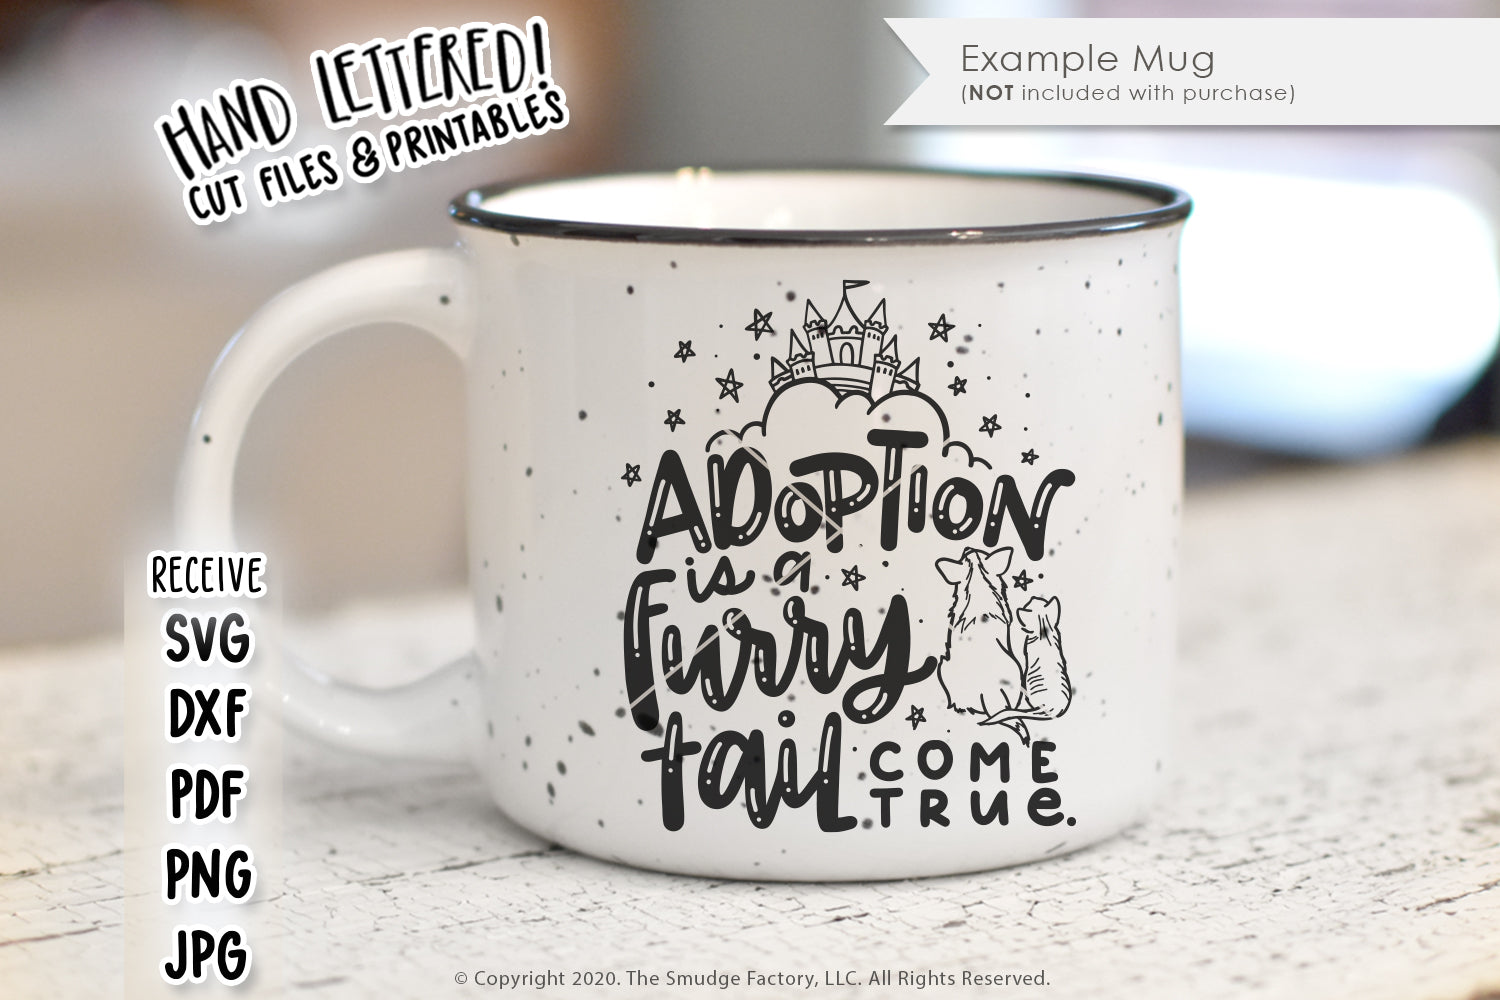 Adoption Is A Furry Tail Come True SVG & Printable